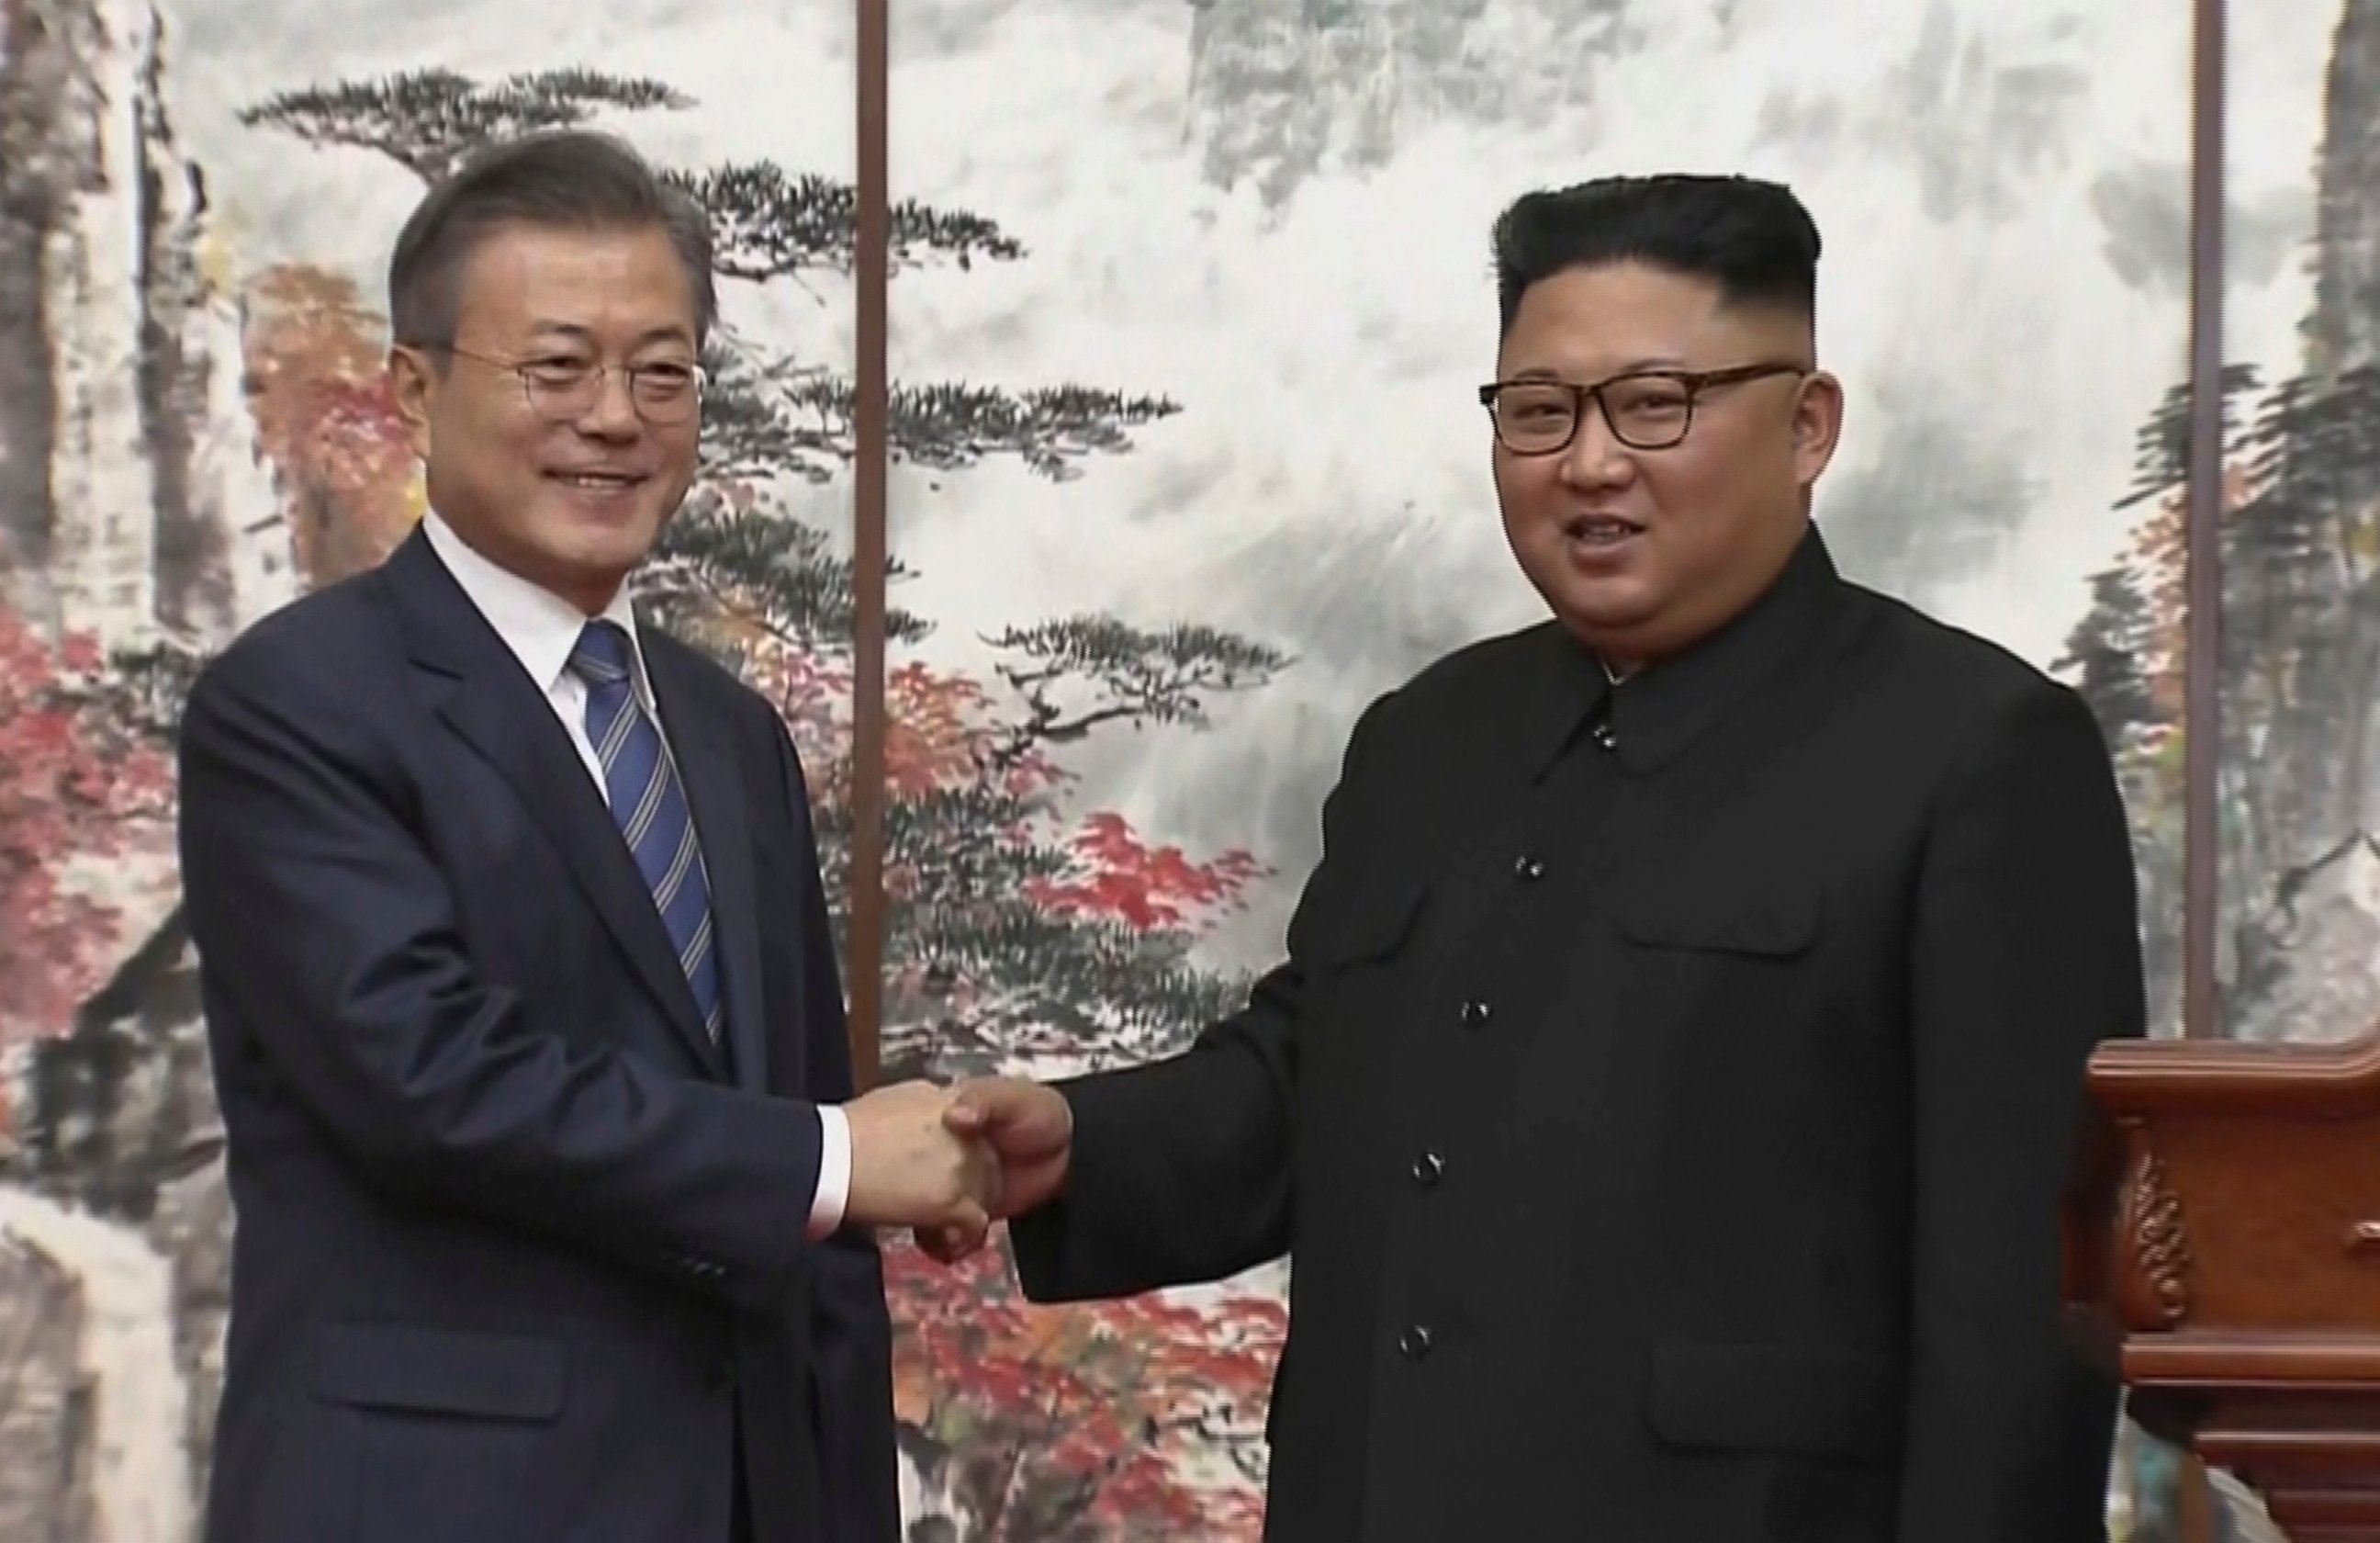 In this image made from video provided by Korea Broadcasting System, North Korean leader Kim Jong Un, right, and South Korean President Moon Jae-in shake hands at the end of their press conference in Pyongyang, North Korea Wednesday, Sept. 19, 2018.